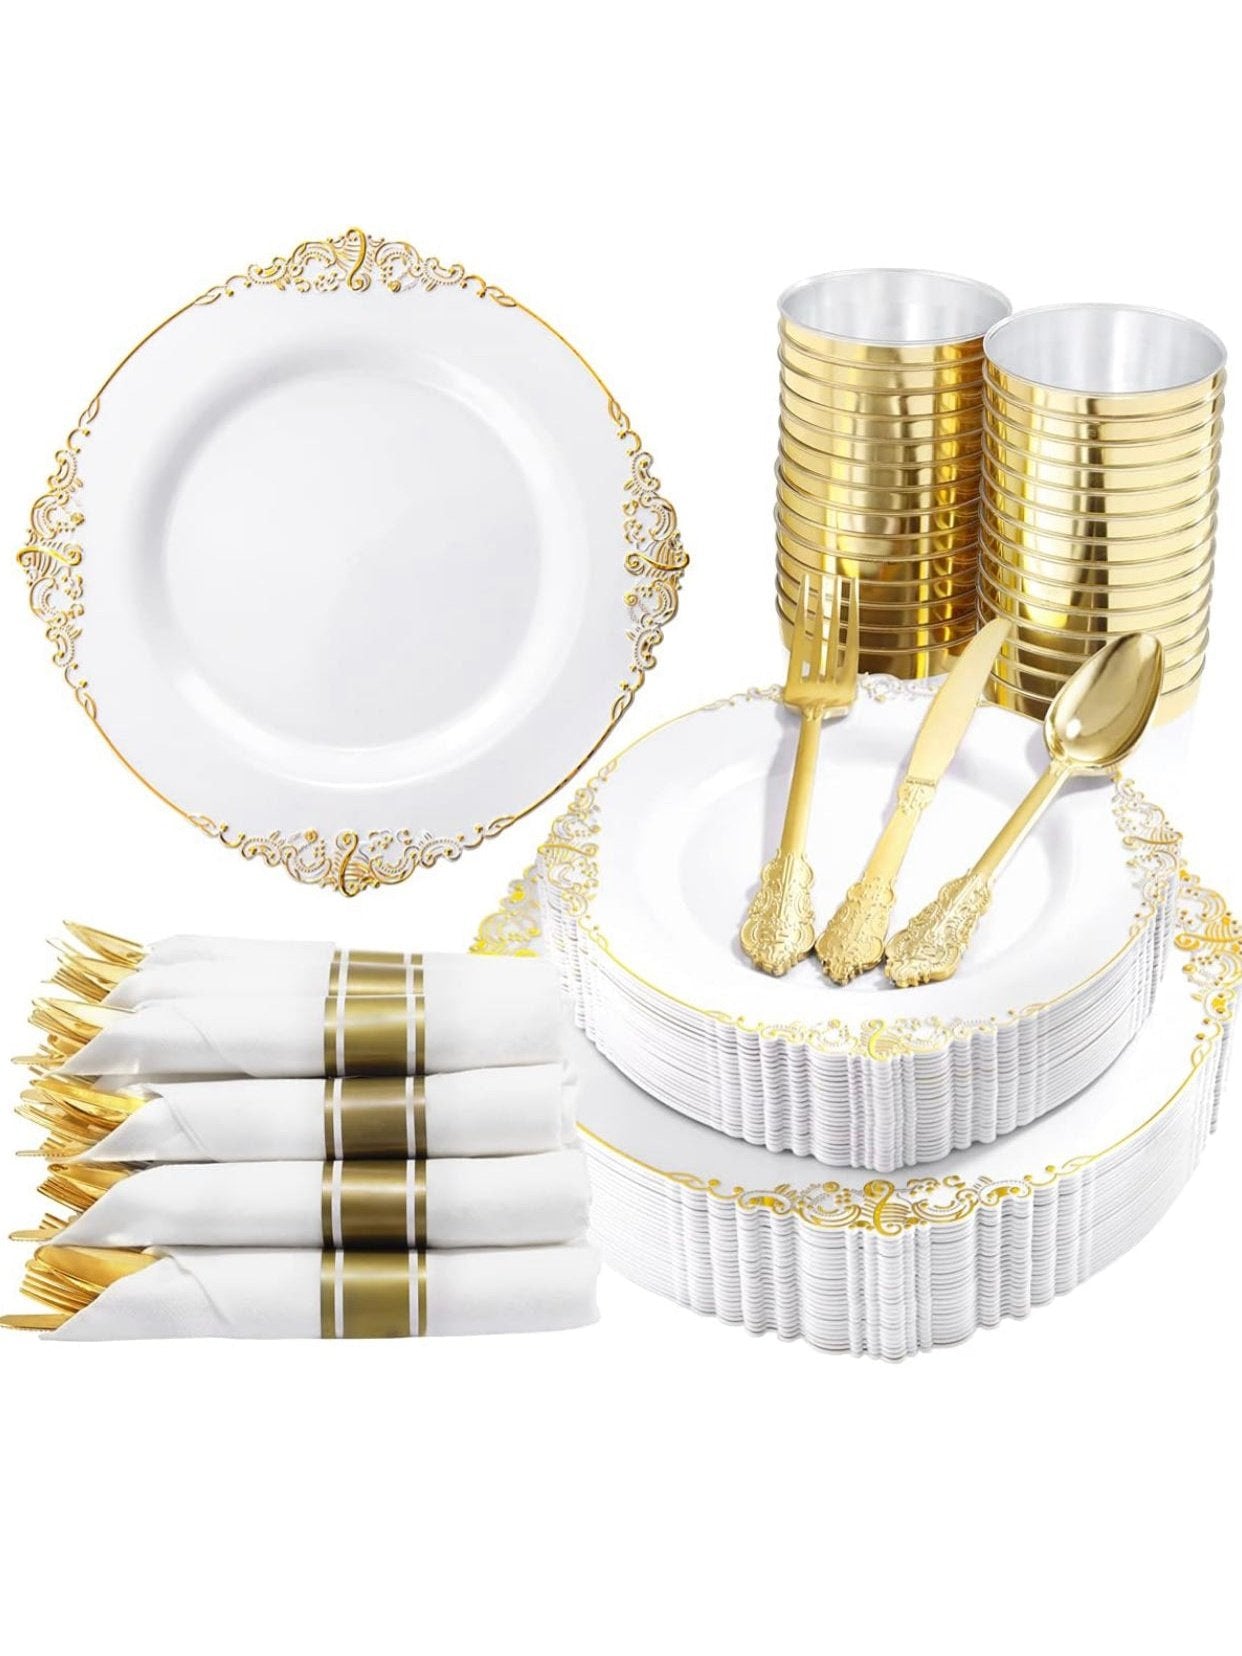 Nervure 350PCS Gold Plastic Plates - Disposable Dinnerware Plates and Pre Rolled Napkins with Plastic Cutlery for 50 Guests, 100Plates, 150Silverware, 50Cups, 50Napkins for Wedding&Party Heavyweight